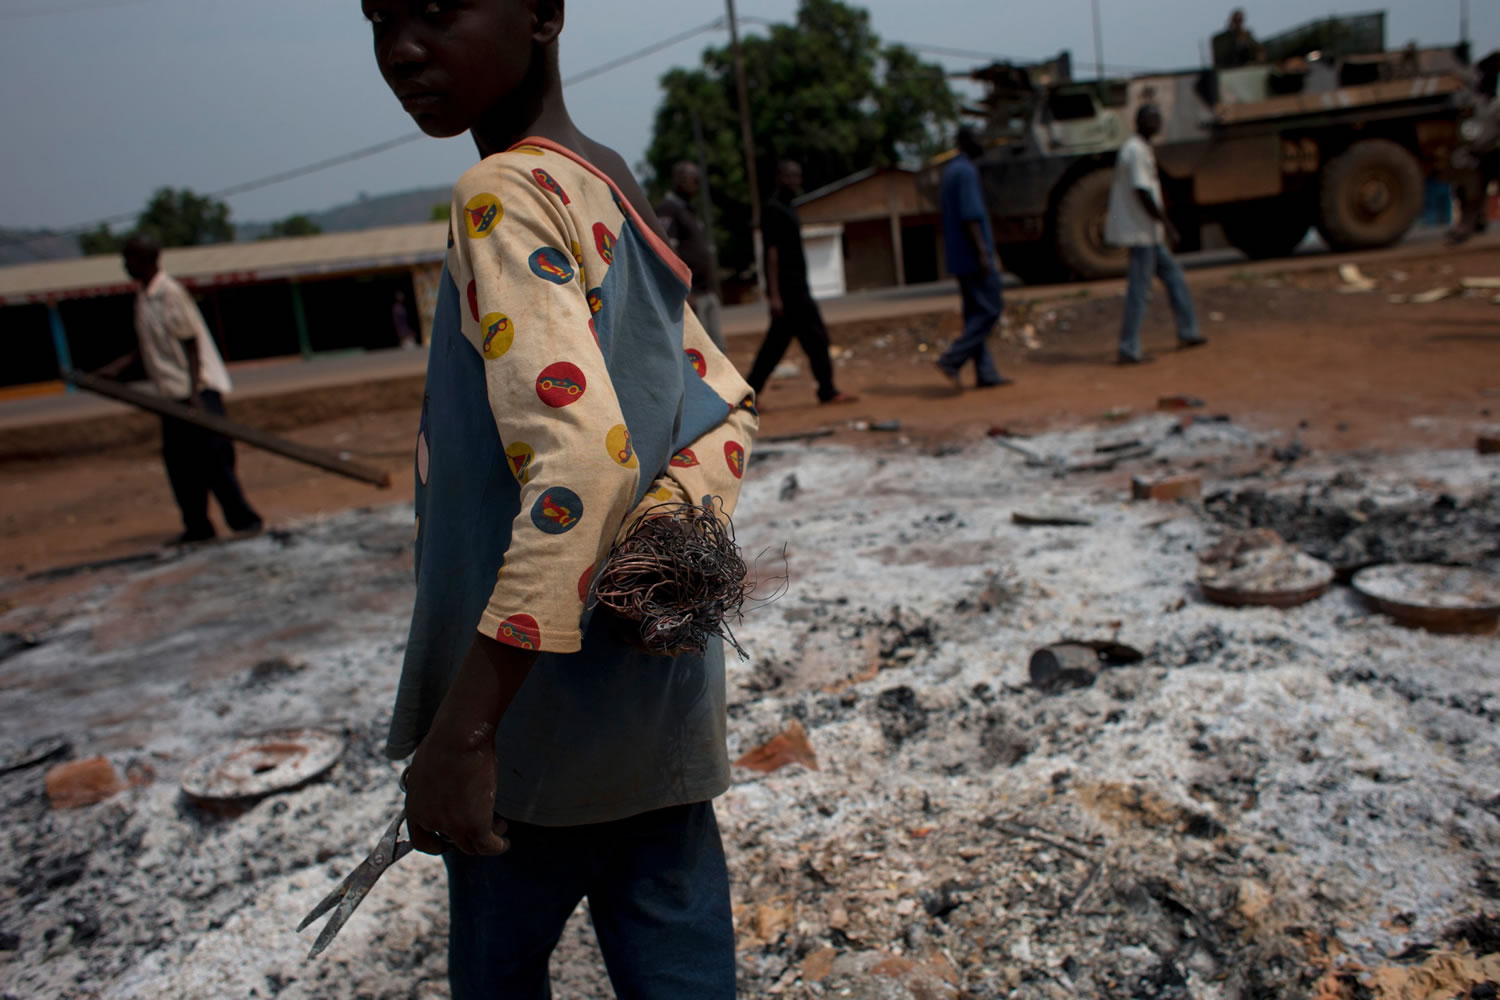 A boy salvages scraps of metal from the remains of burned shops, as French soldiers stand guard in a neighborhood where Chadian soldiers clashed with anti-balaka Christian militiamen on Wednesday afternoon, in the Gobongo neighborhood of Bangui, Central African Republic, on Thursday.